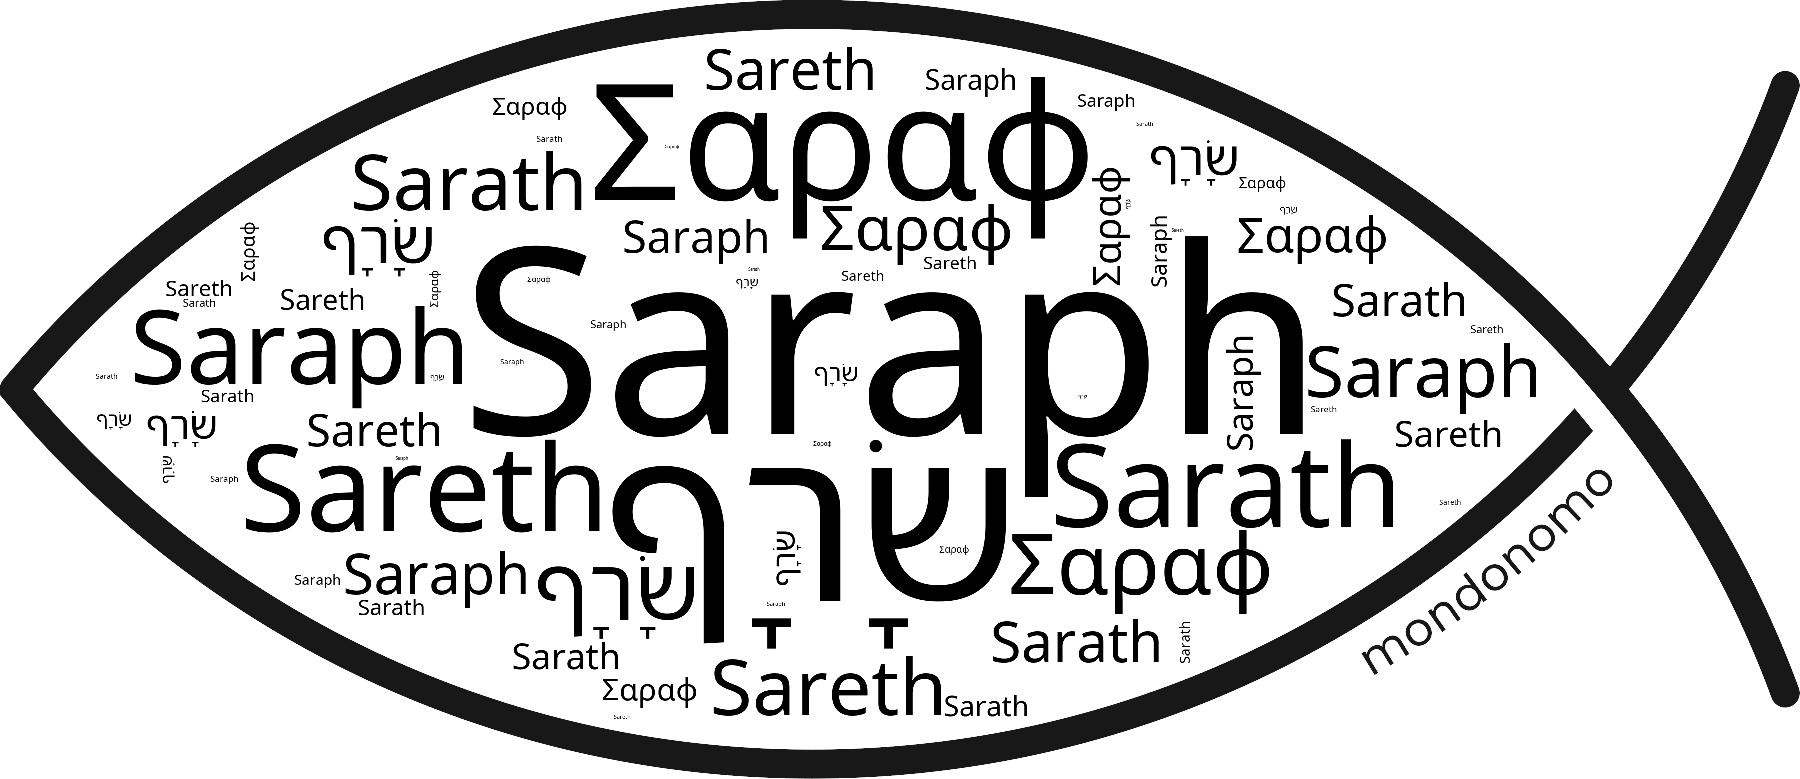 Name Saraph in the world's Bibles